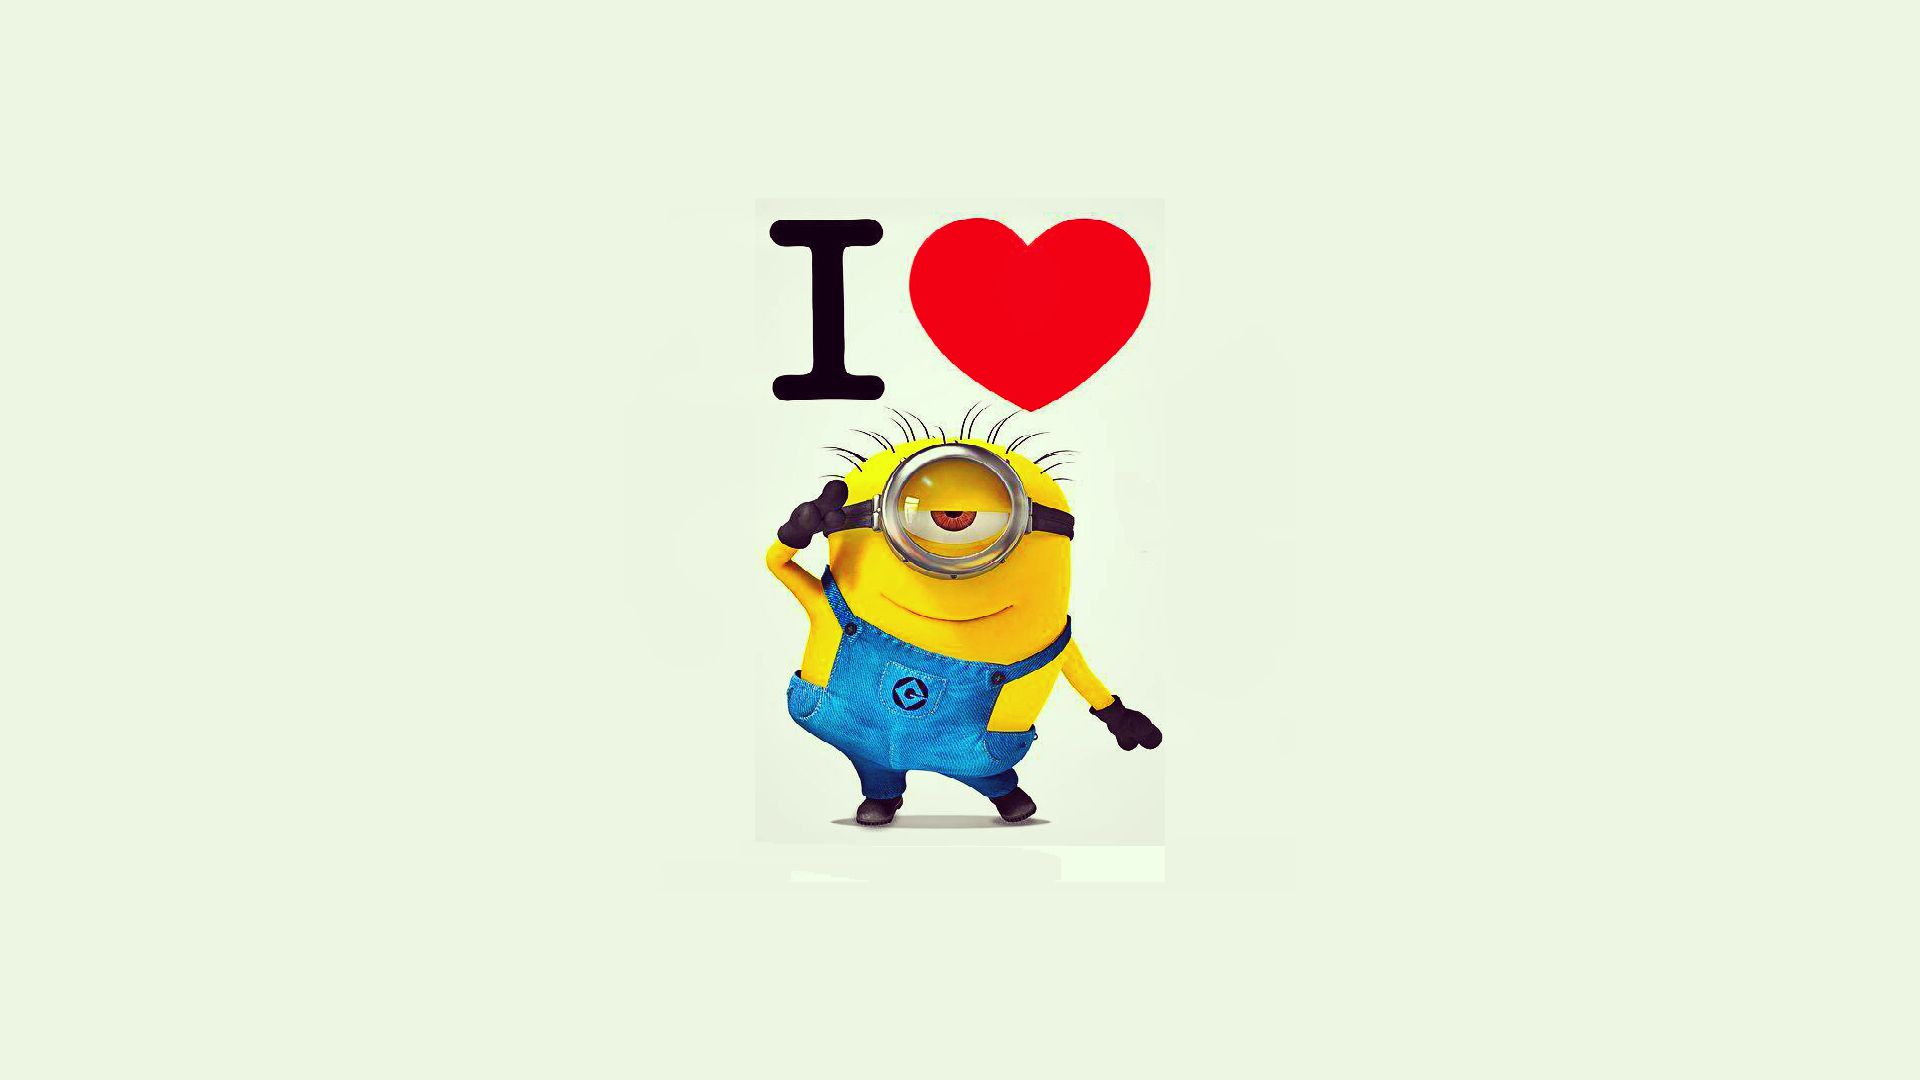  Minions Wallpaper For Desktop HD image and save image as click save